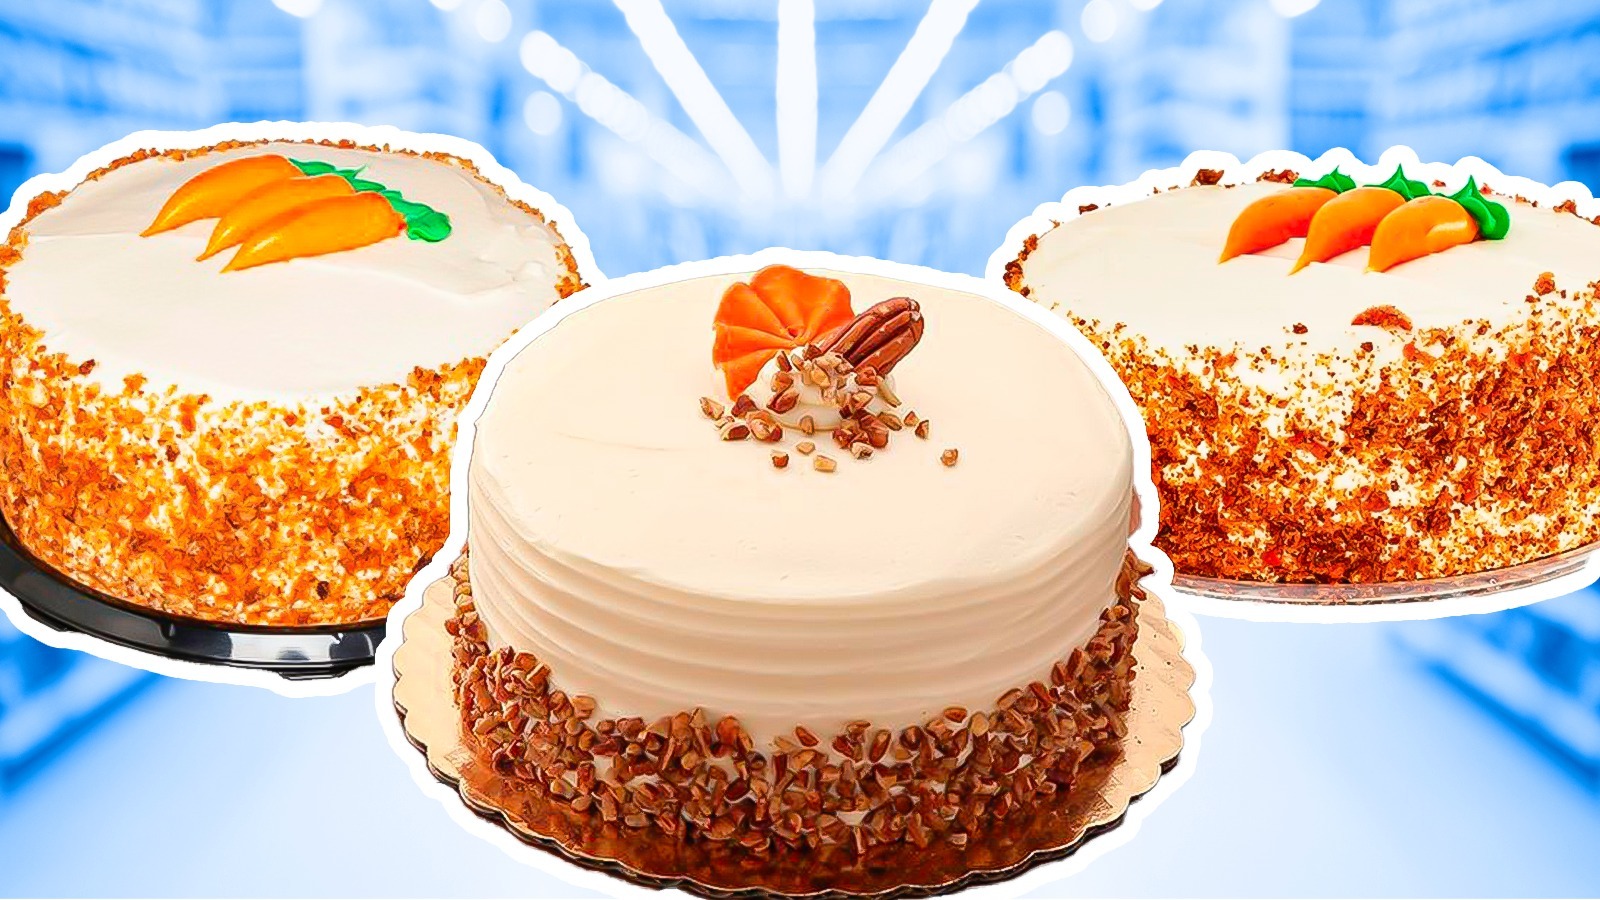 10 Store-Bought Carrot Cakes, From Worst To First